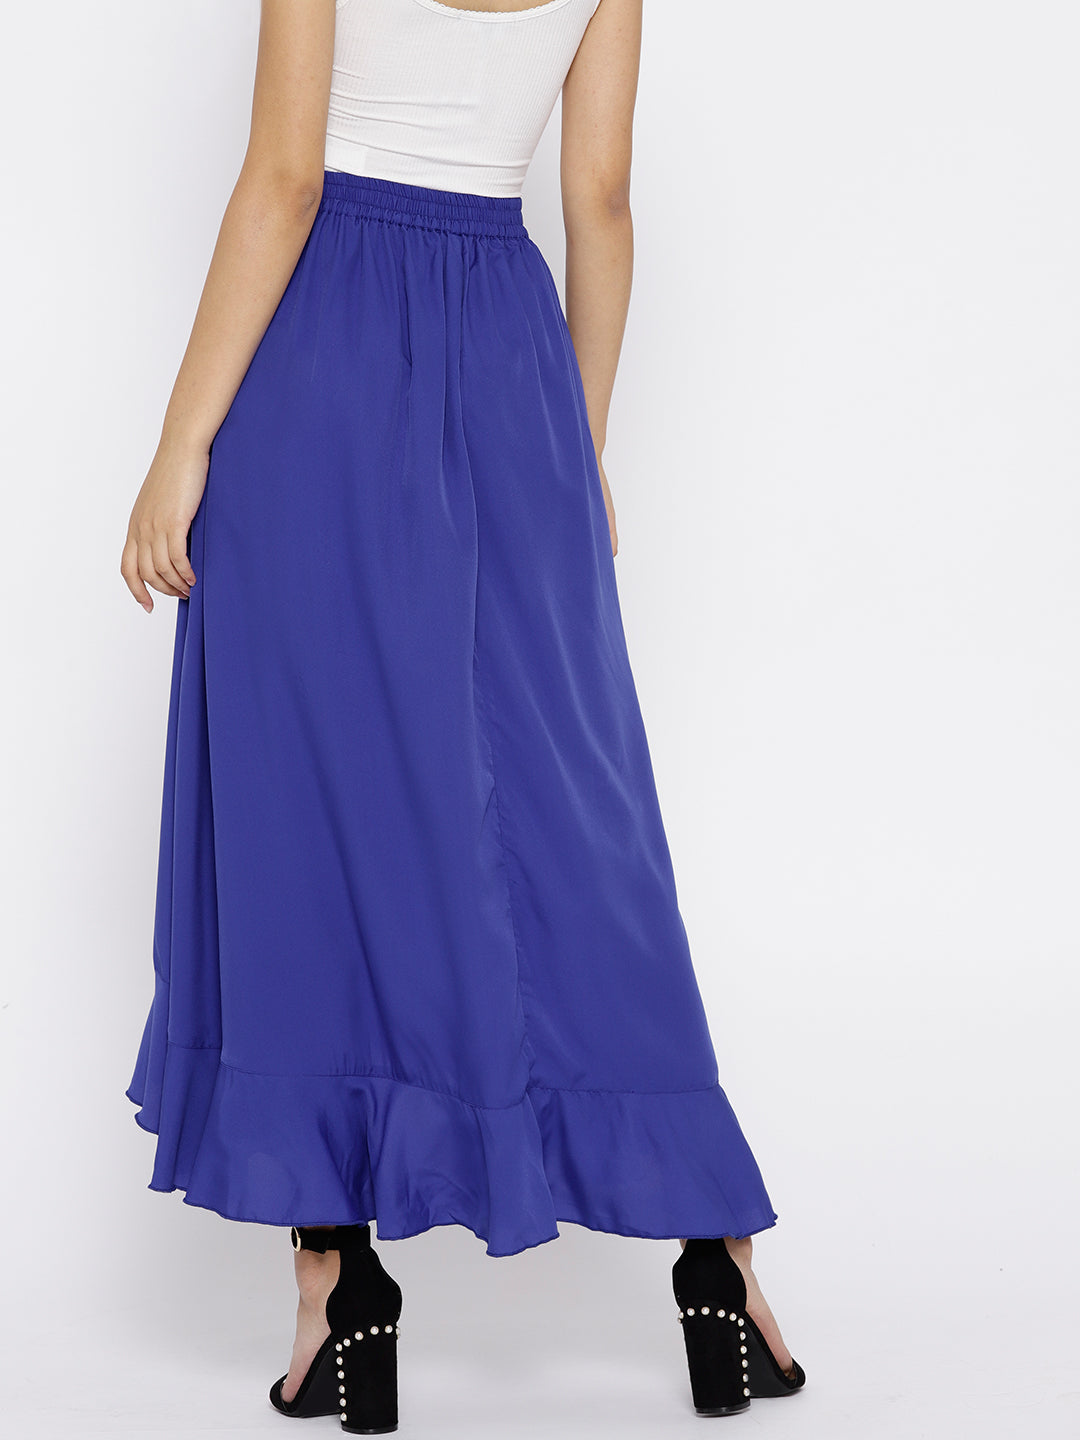 Berrylush Women Blue Solid Ruffled Flared Maxi Skirt with Attached Tro